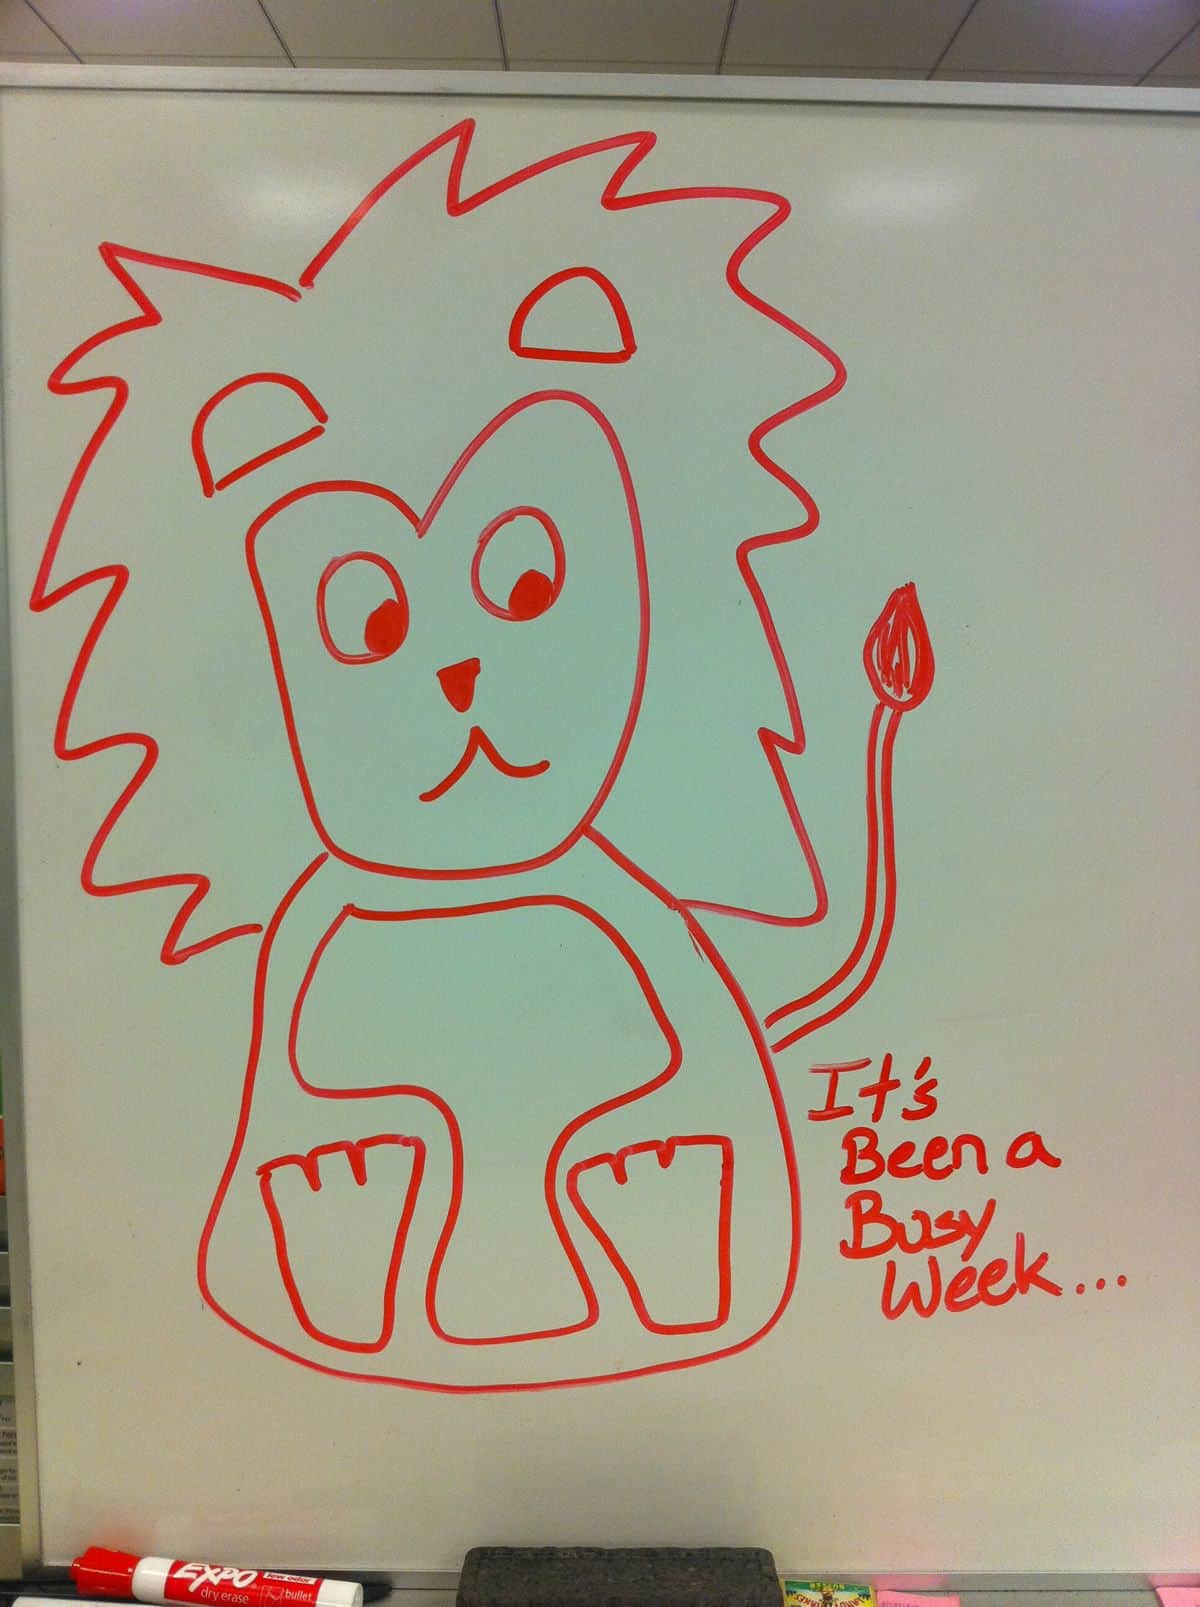 A cartoon of a lion drawn in red marker on a whiteboard with the caption, “It’s been a busy week.”